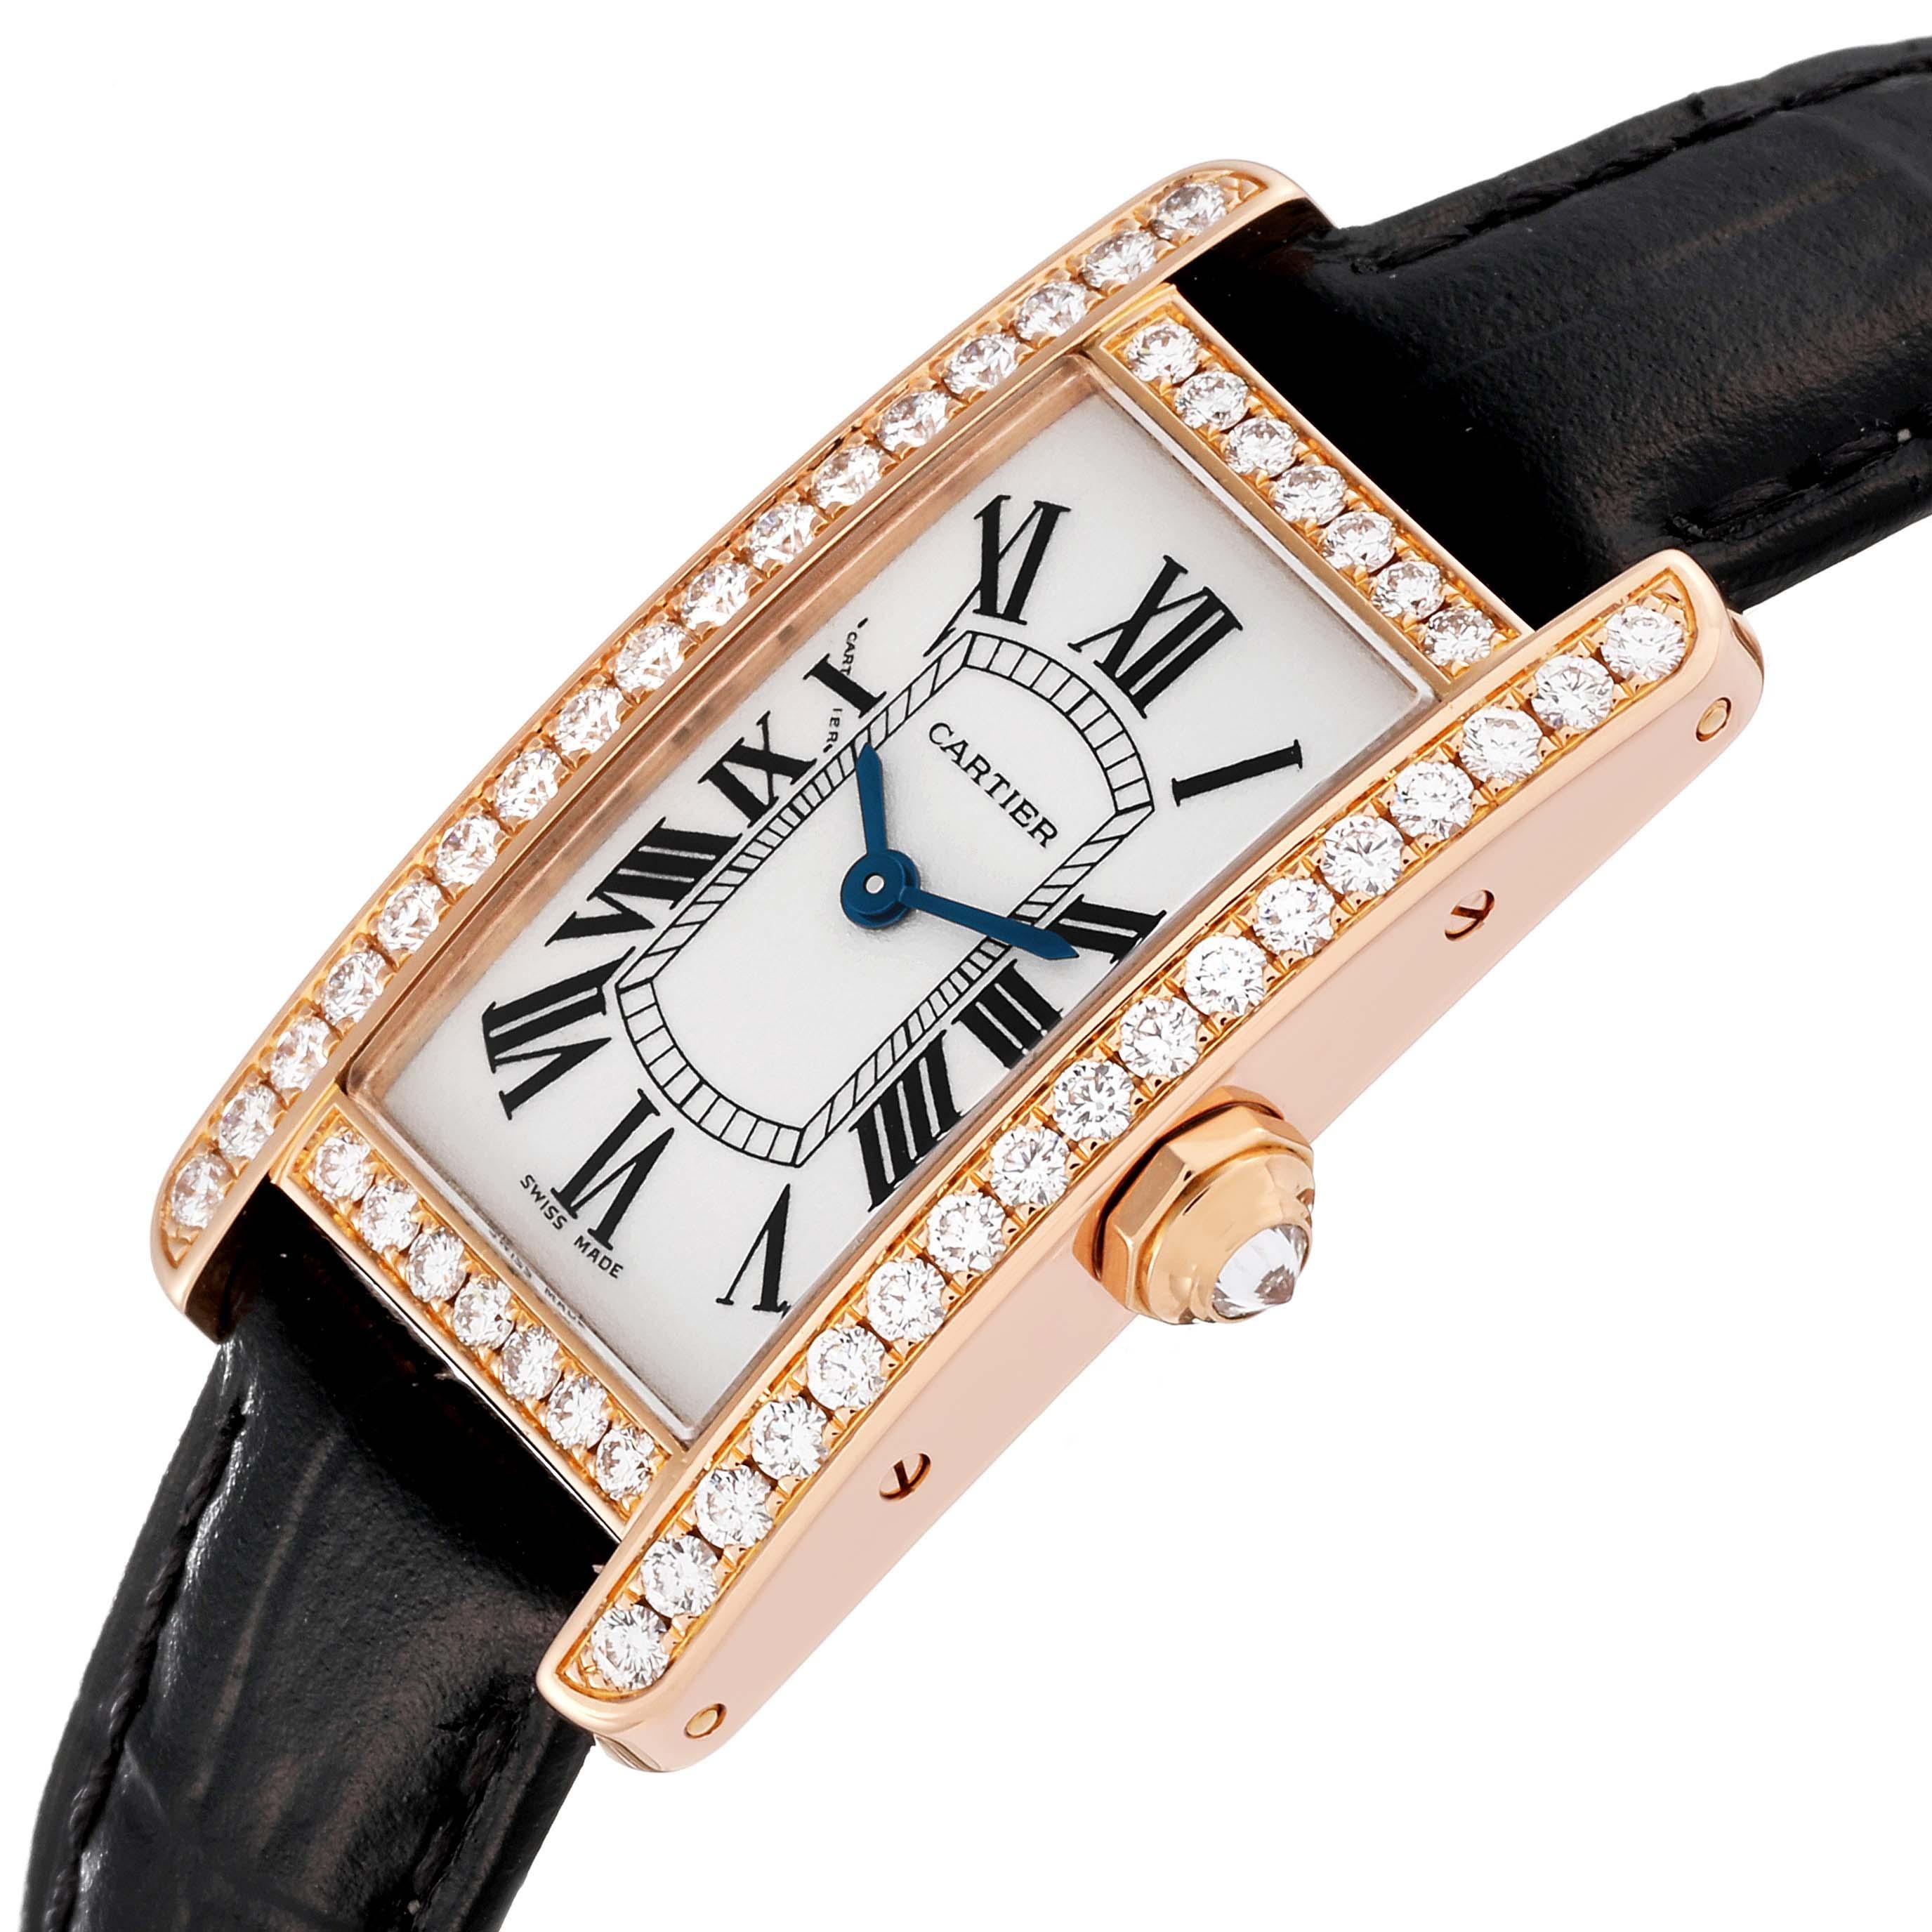 Cartier Tank Americaine Small Rose Gold Diamond Ladies Watch WJTA0002 For Sale 1